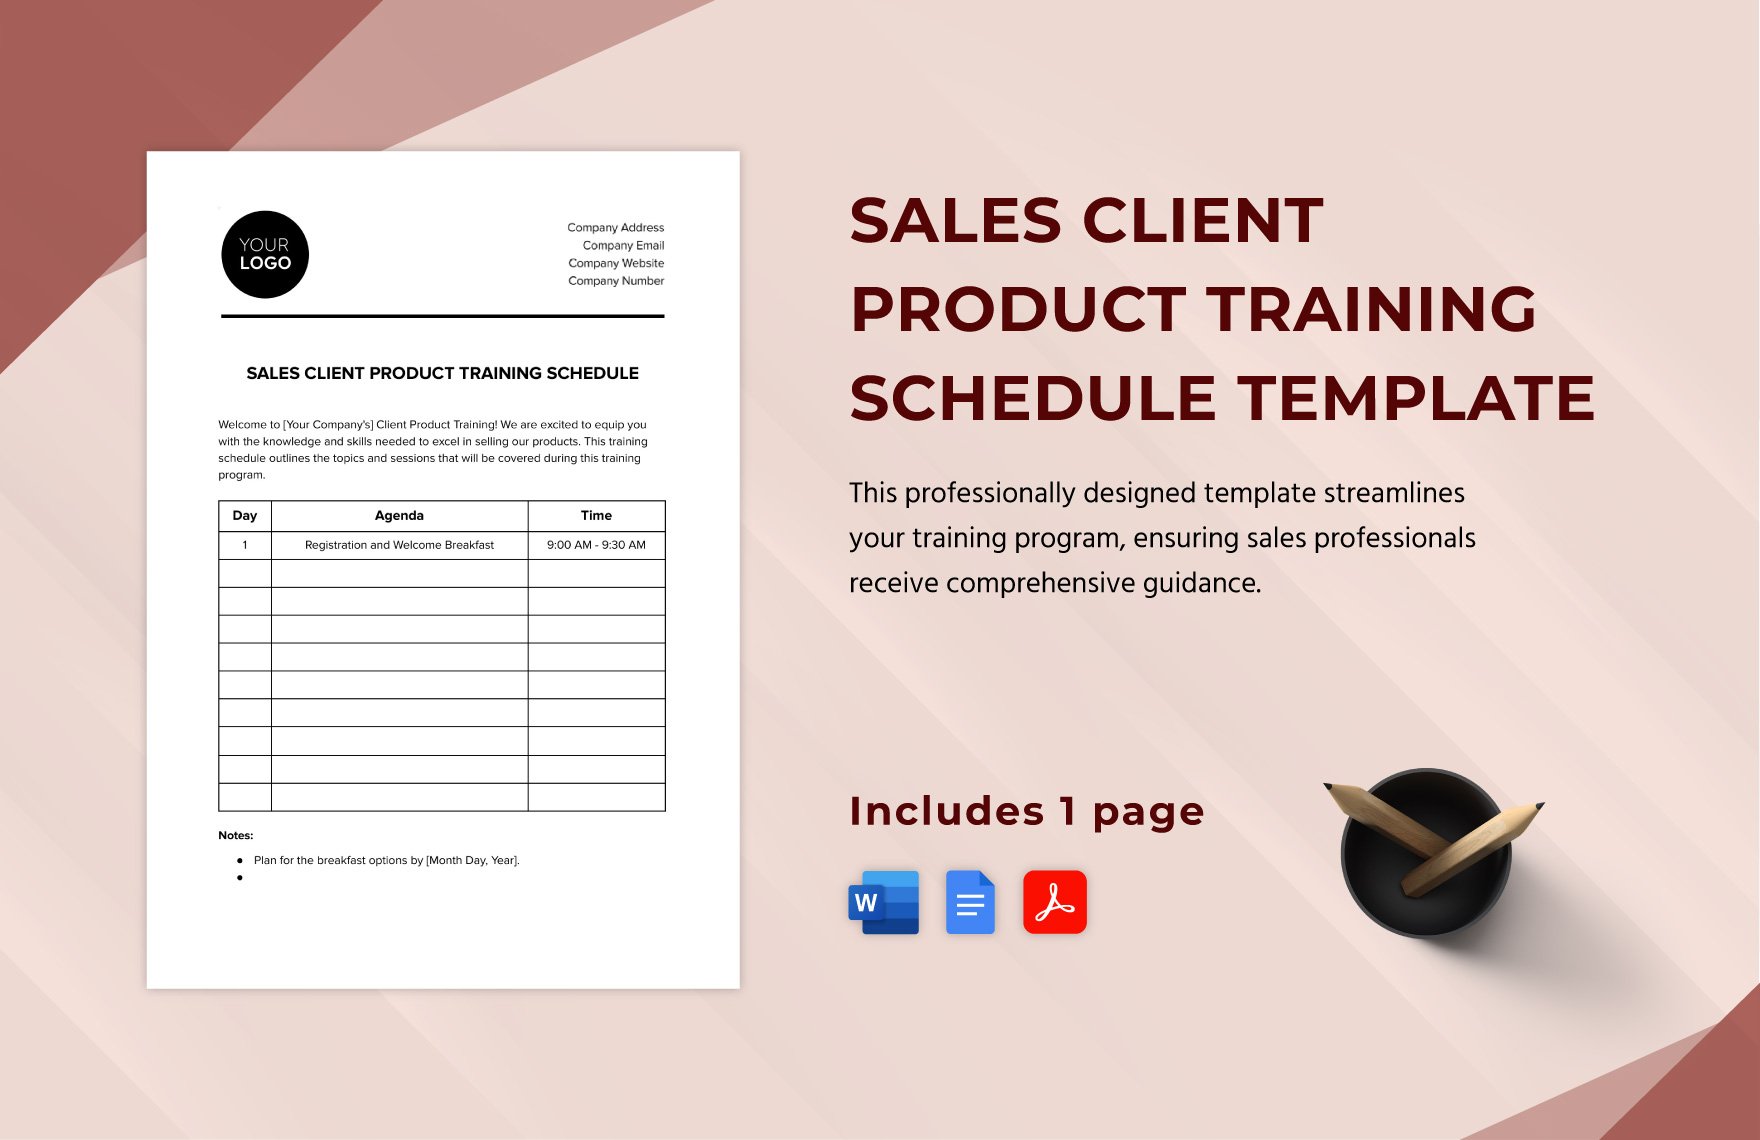 Sales Client Product Training Schedule Template in Word, Google Docs, PDF